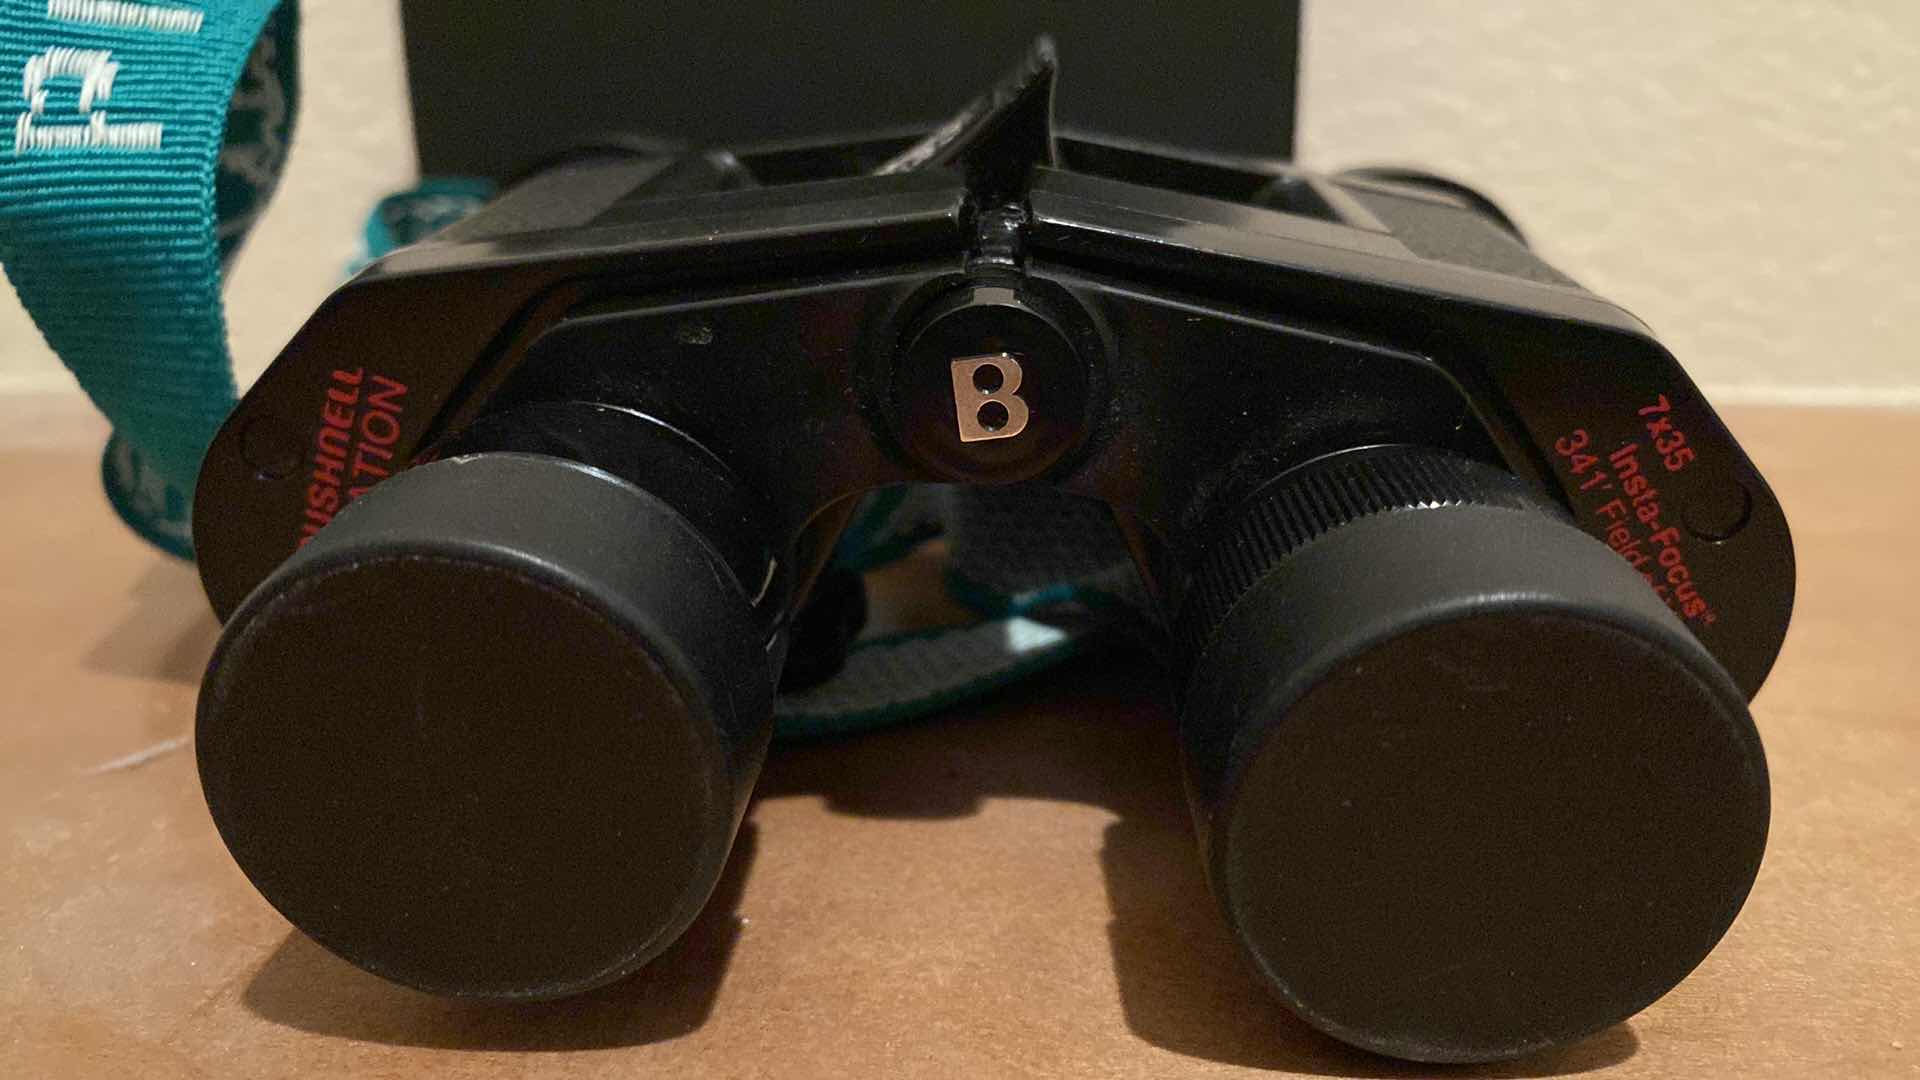 Photo 5 of BUSHNELL BINOCULARS AND CANNON ES970 MOVIE CAMERA